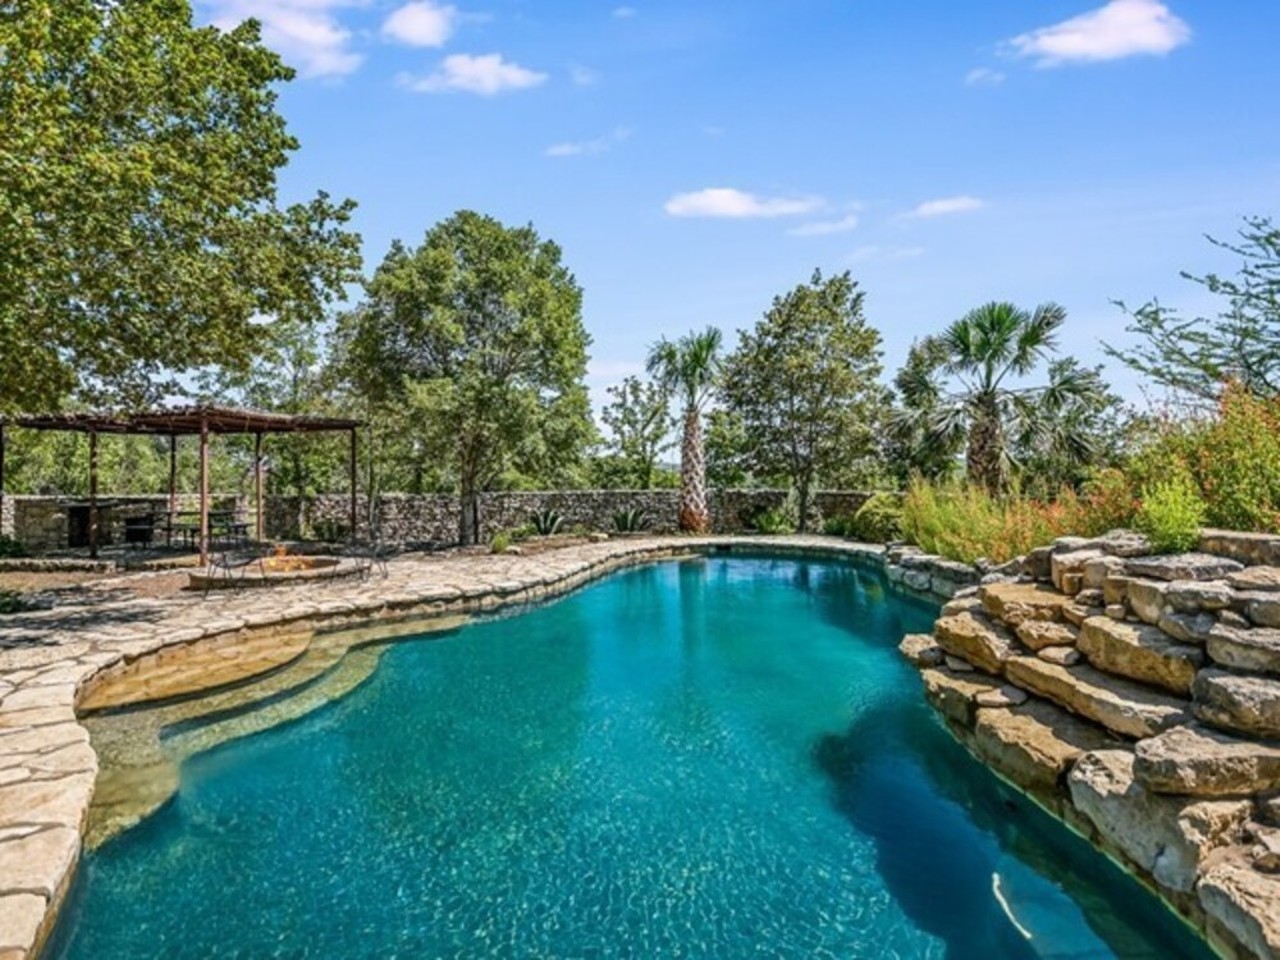 This Texas Hill Country mansion has a massive, 2-story glass atrium with a catwalk